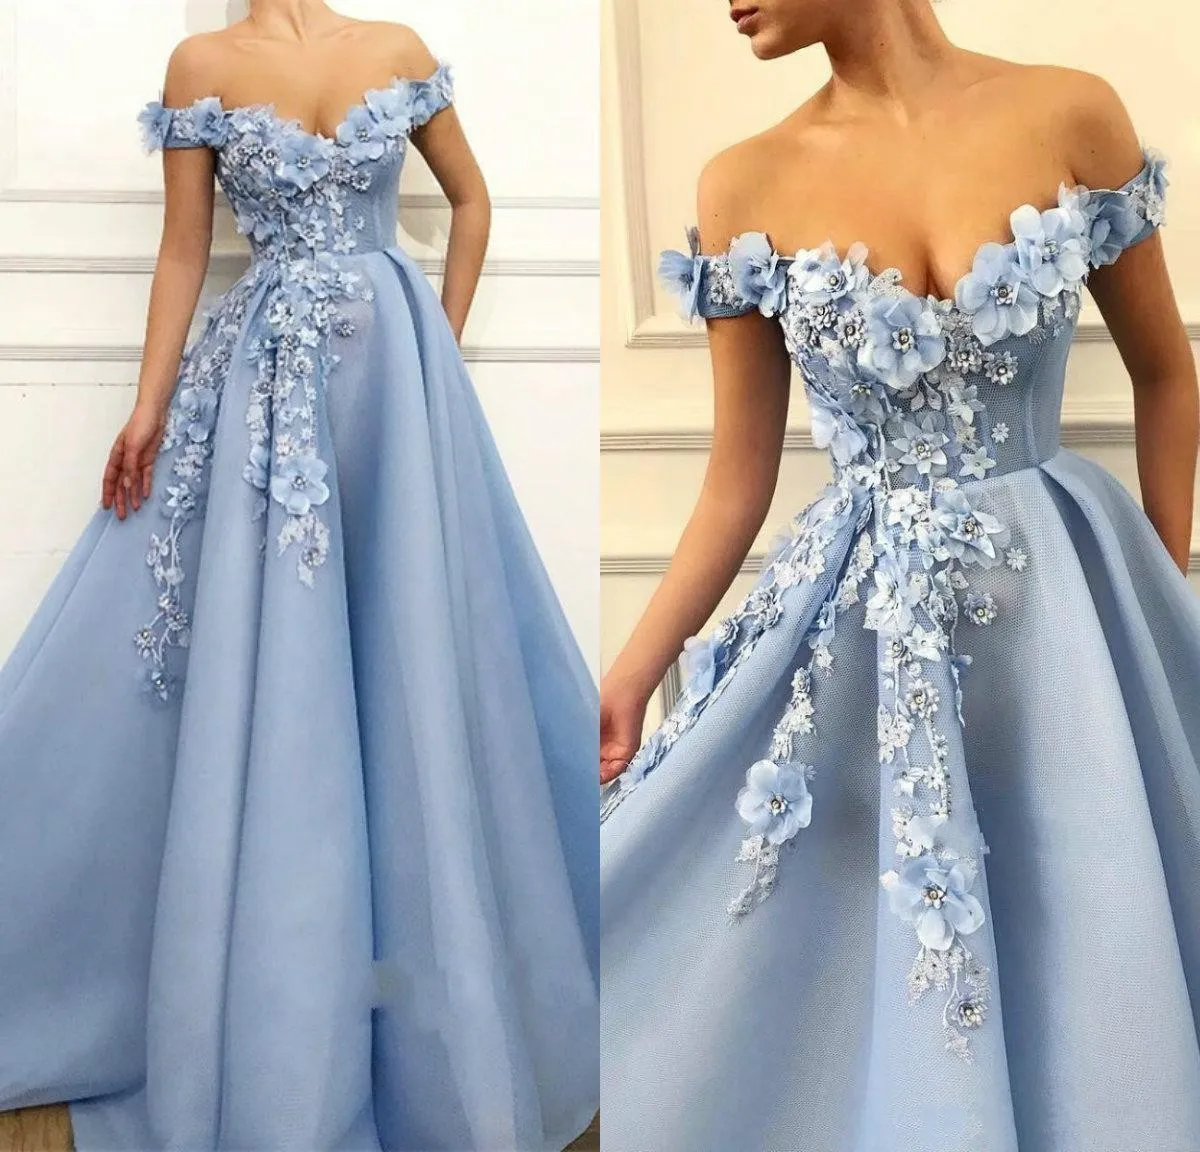 2019 Elegant Blue Prom Dresses Lace 3D Floral Appliqued Pearls Evening Dress A Line Off The Shoulder Custom Made Special Occasion Gowns